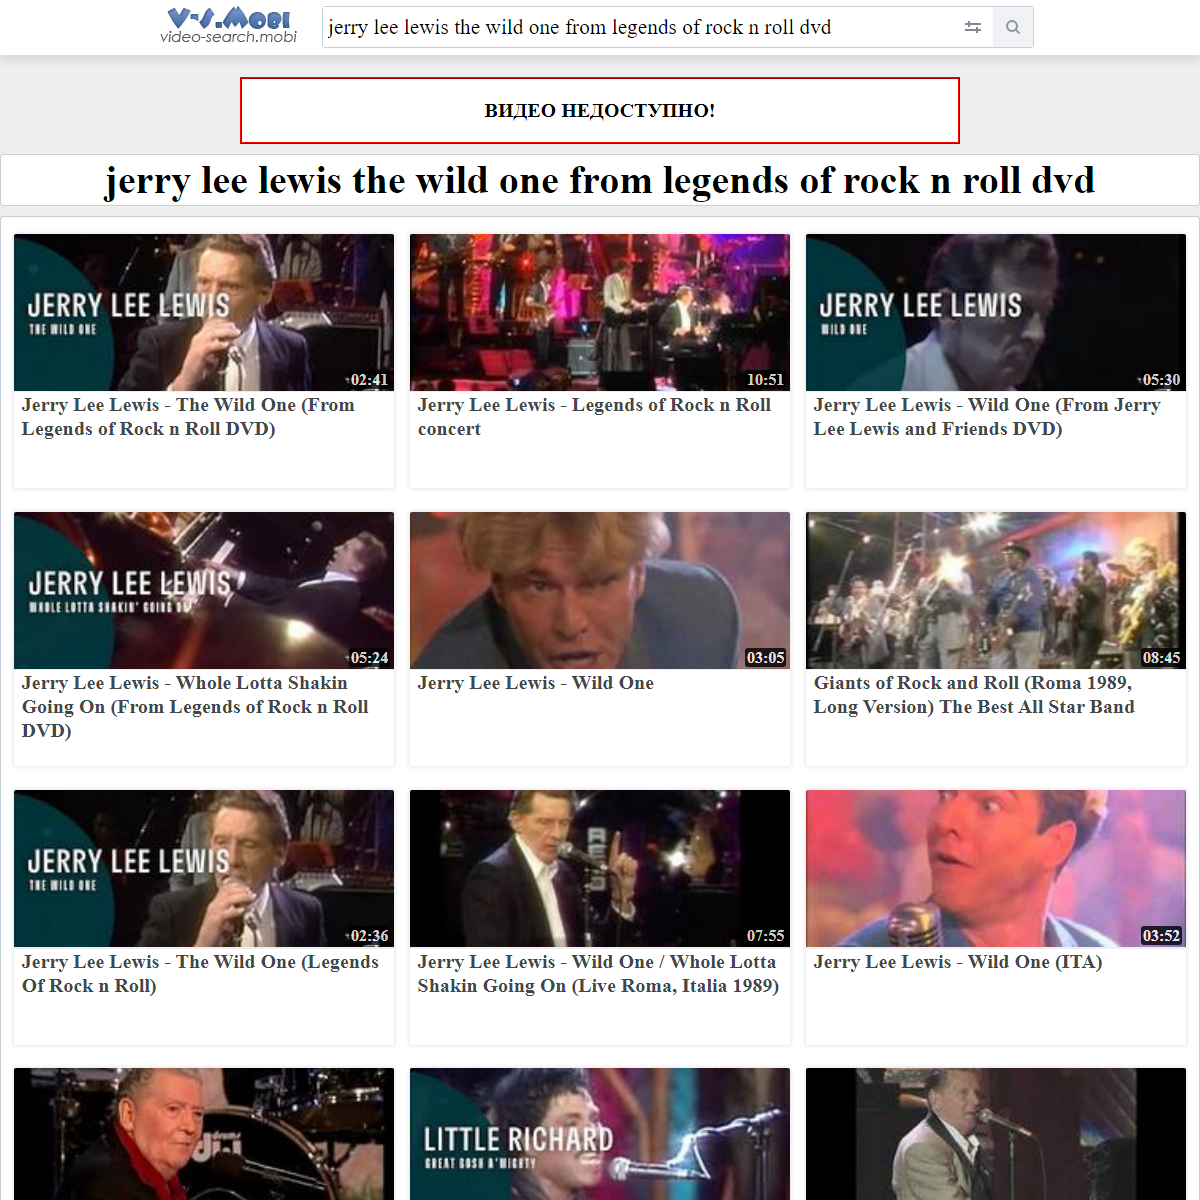 A complete backup of https://v-s.mobi/jerry-lee-lewis-the-wild-one-from-legends-of-rock-n-roll-dvd-02:41